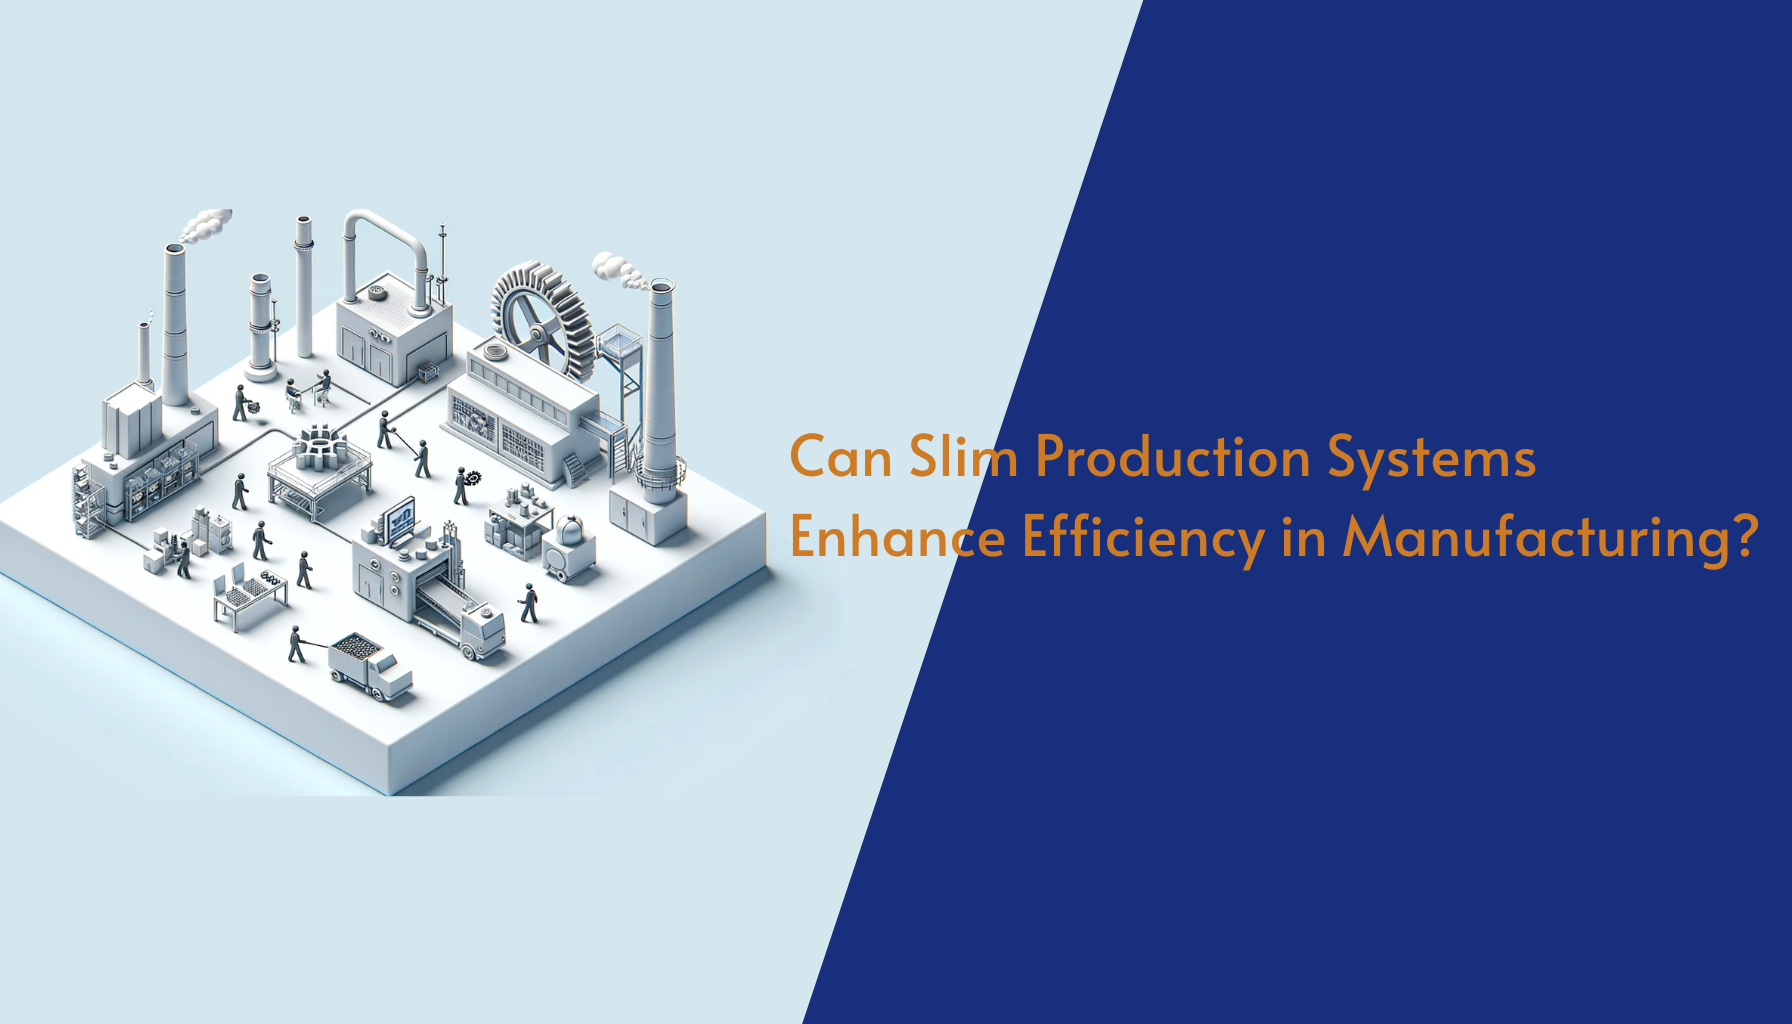 Can Slim Production Systems be a lean and efficient production method in the manufacturing industry?